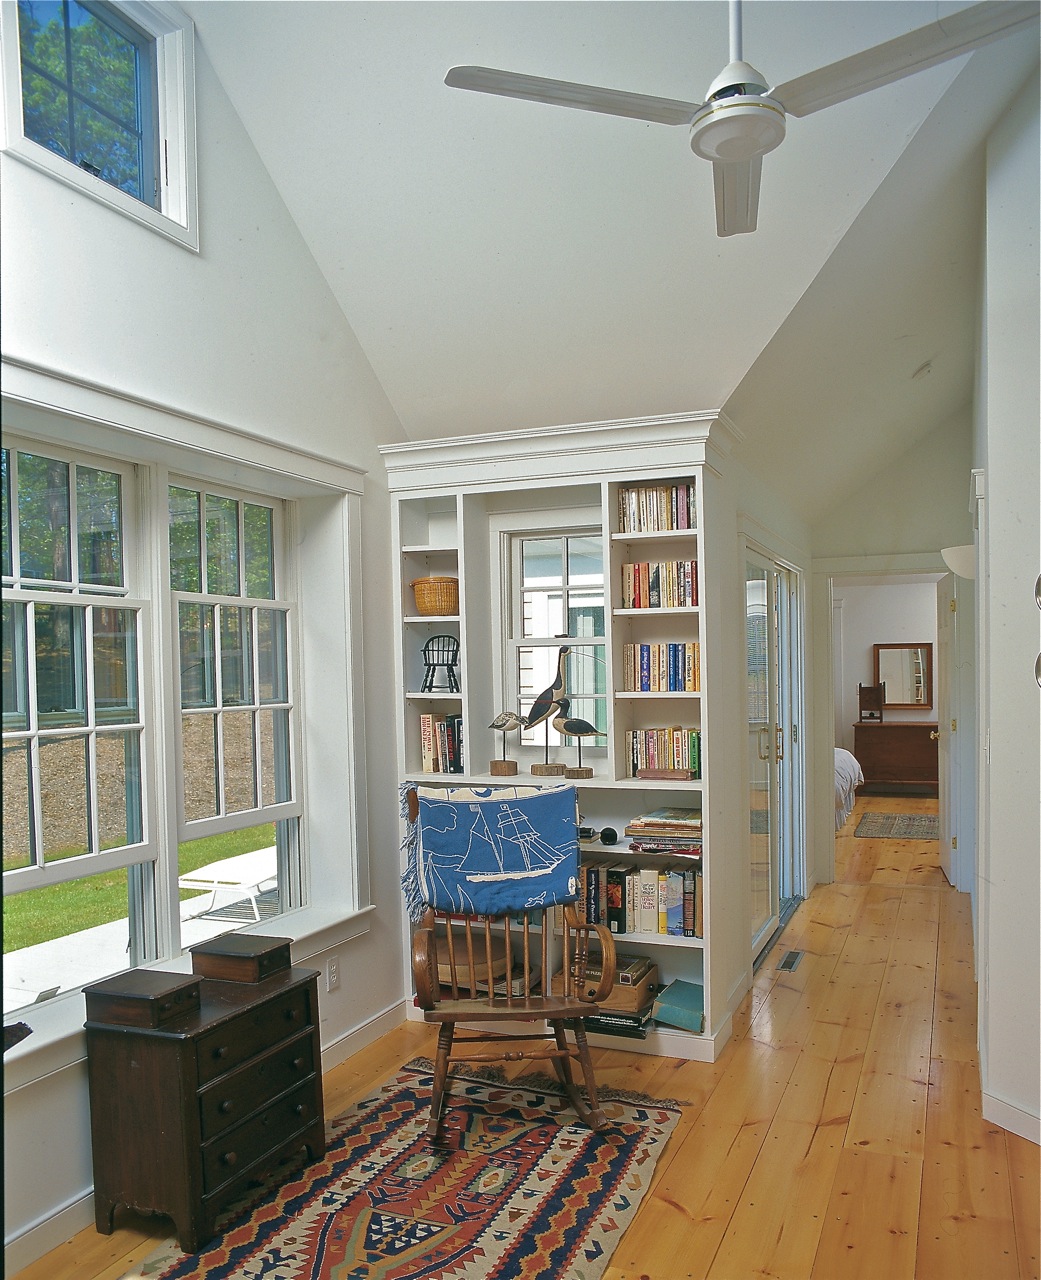 Vaulted ceiling, built-in bookcases, Cape Cod House by Duxbury MA architect and builder